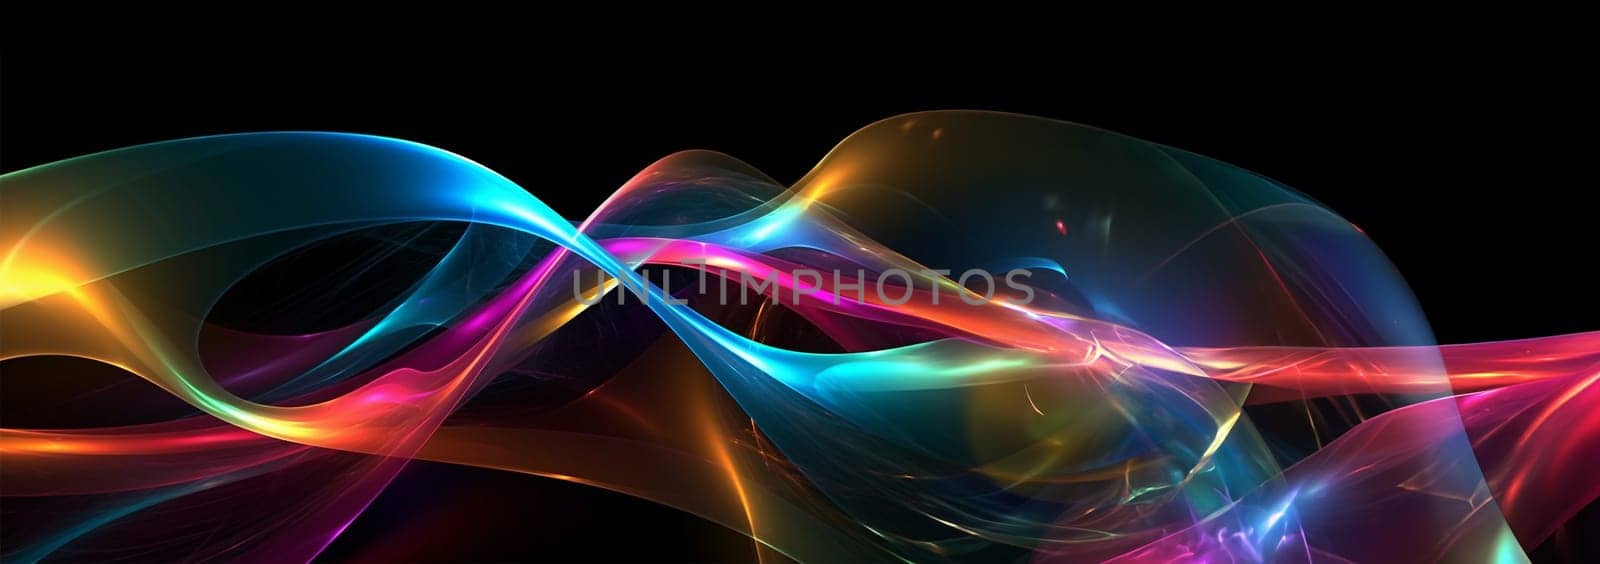 Banner Abstract 3d render. Multicolored waves. Holographic shape in motion. Iridescent gradient digital art for banner background, wallpaper. Transparent glossy design element flying in seascape. Black background Various neon colors by Annebel146